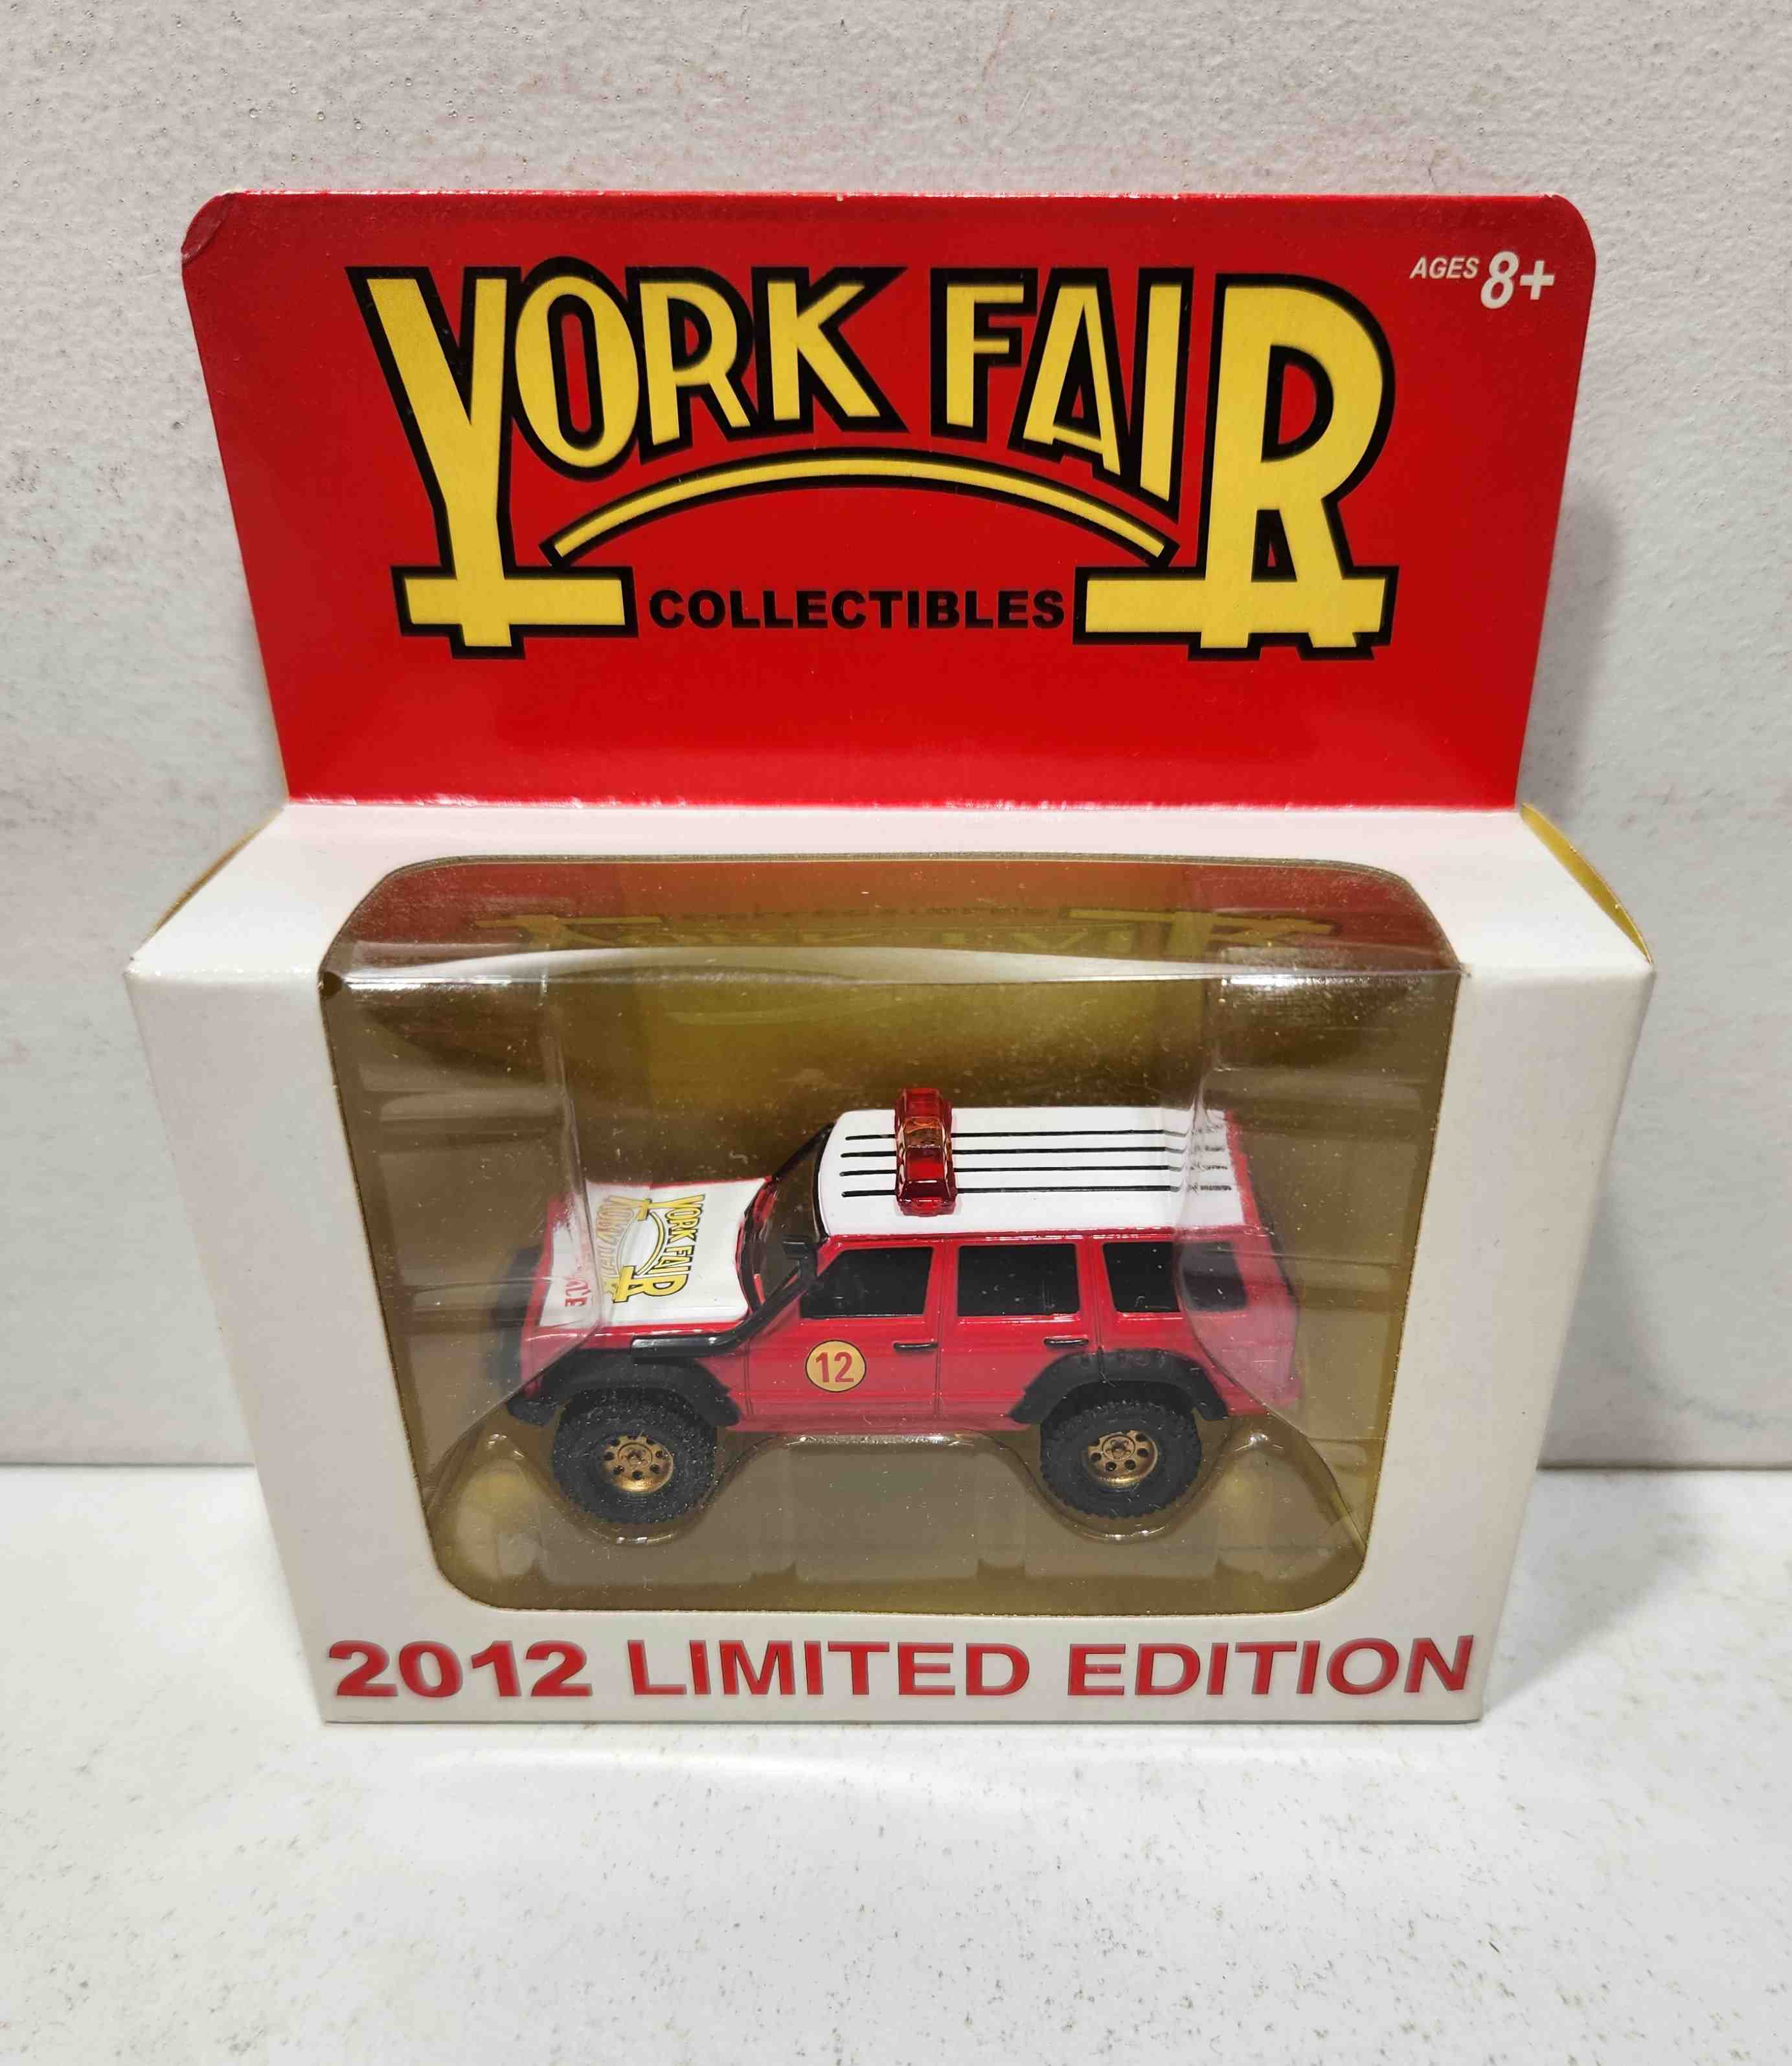 2012 York Fair 1/64th "Fire/Police Emergency Jeep Vehicle"  by Johnny Lightning